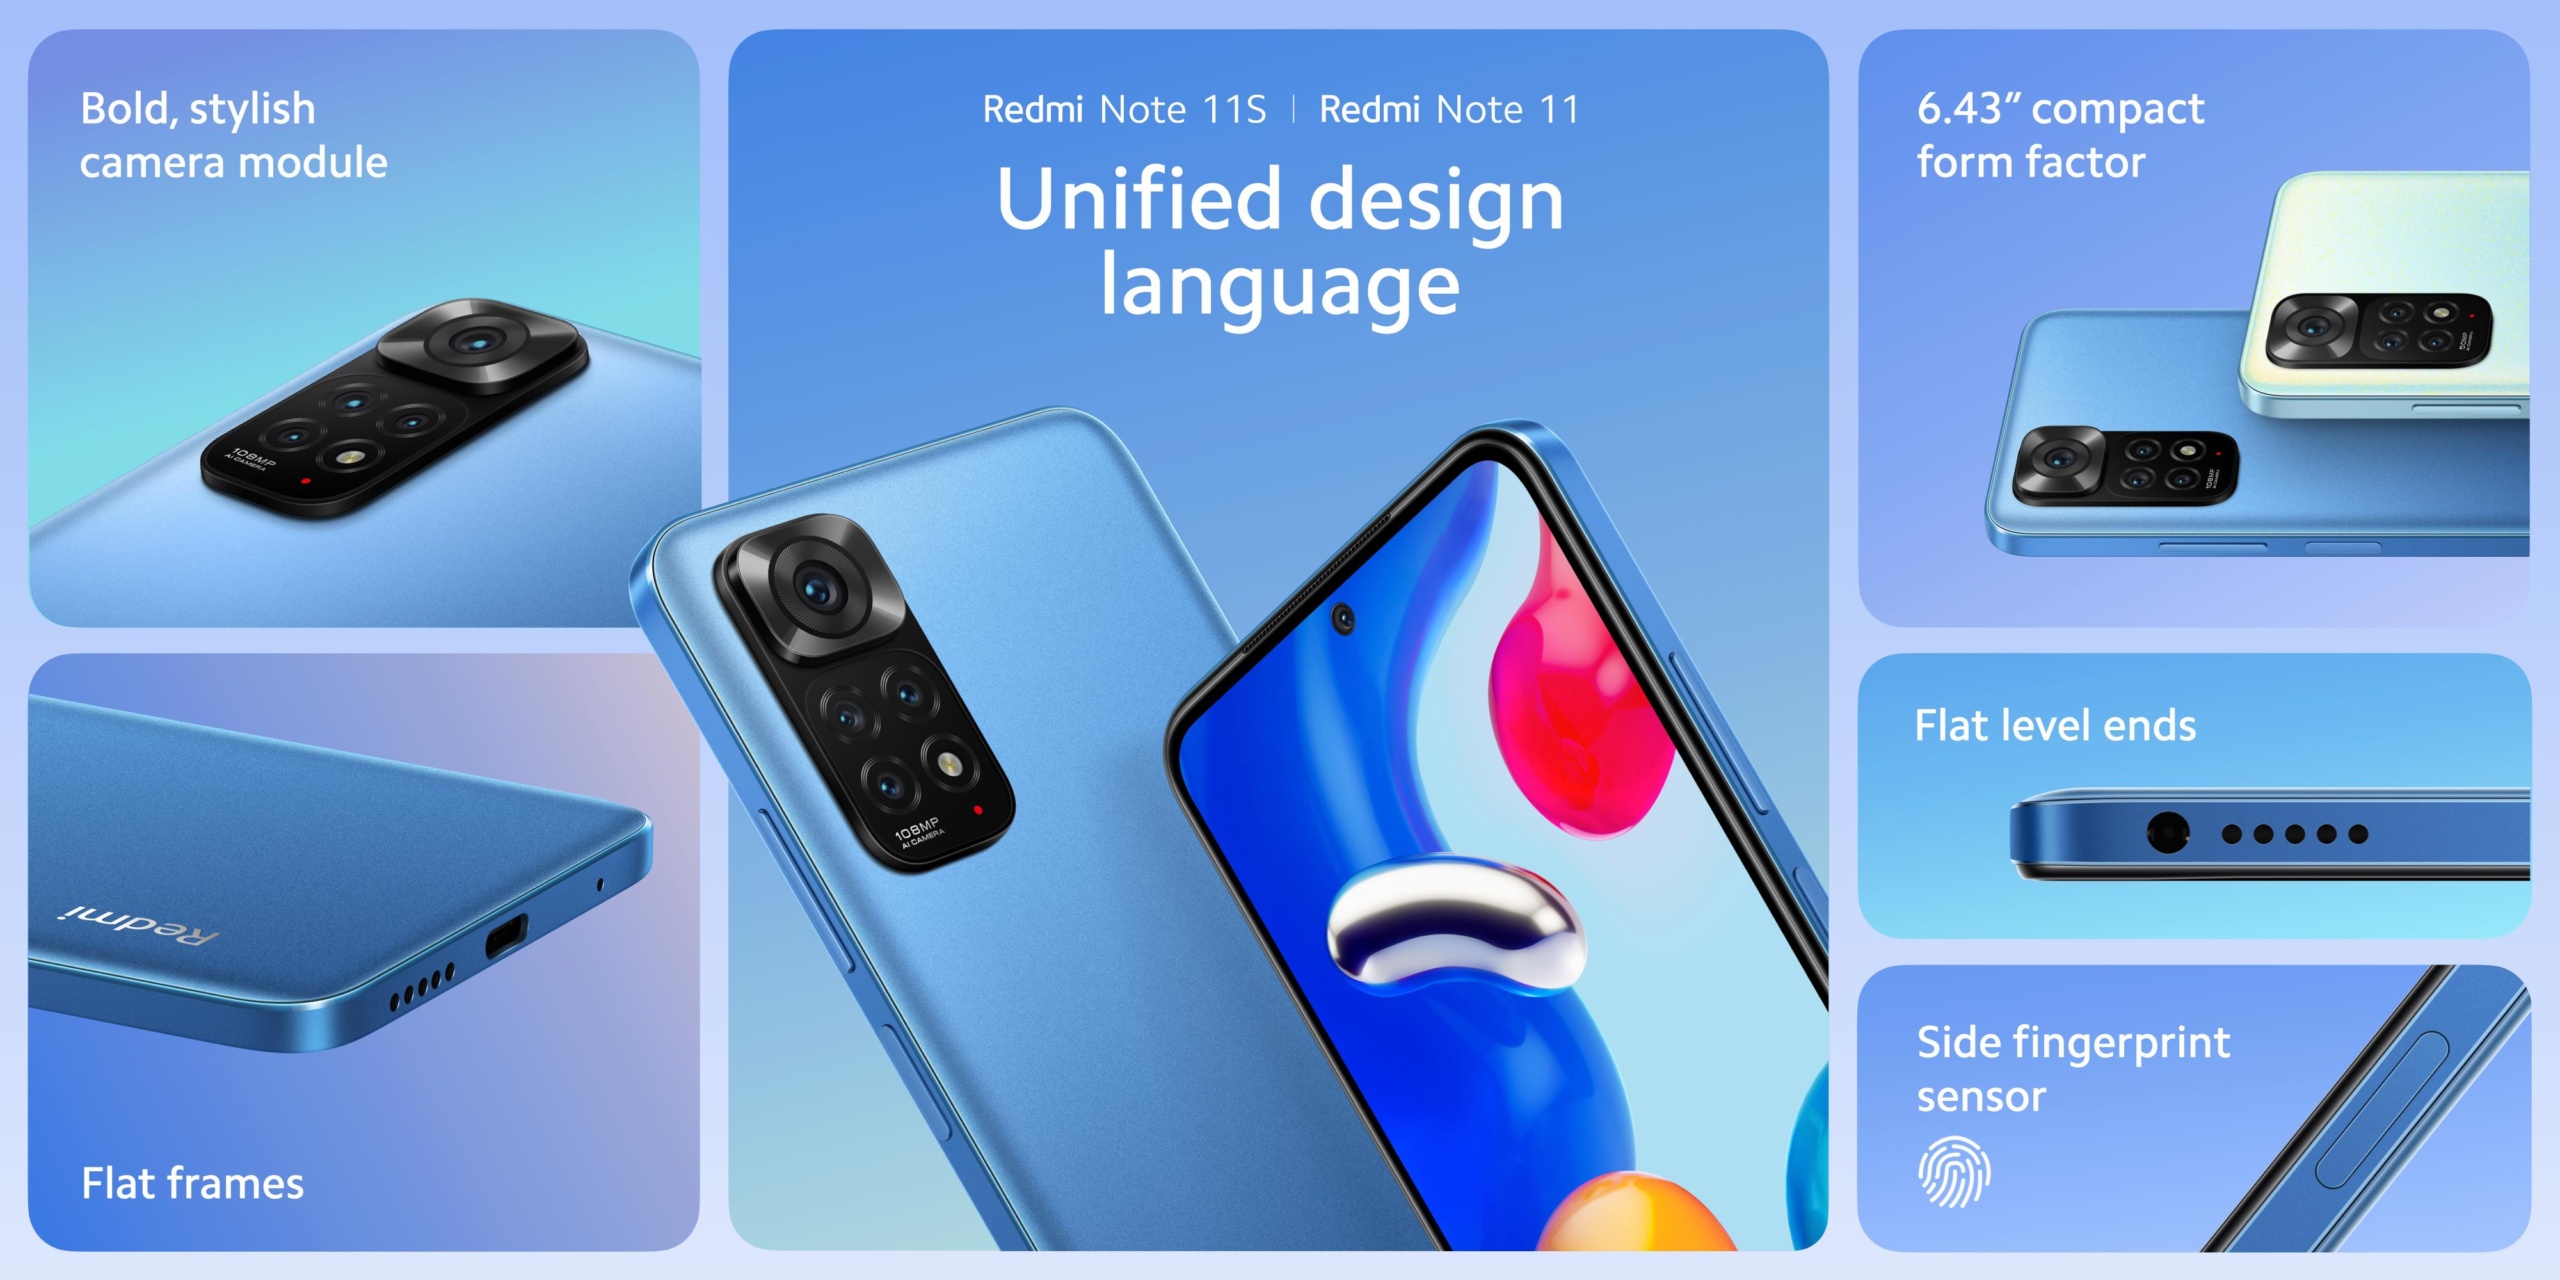 Xiaomi introduced new models Redmi Note 11 and Note 11S ⋆ 10